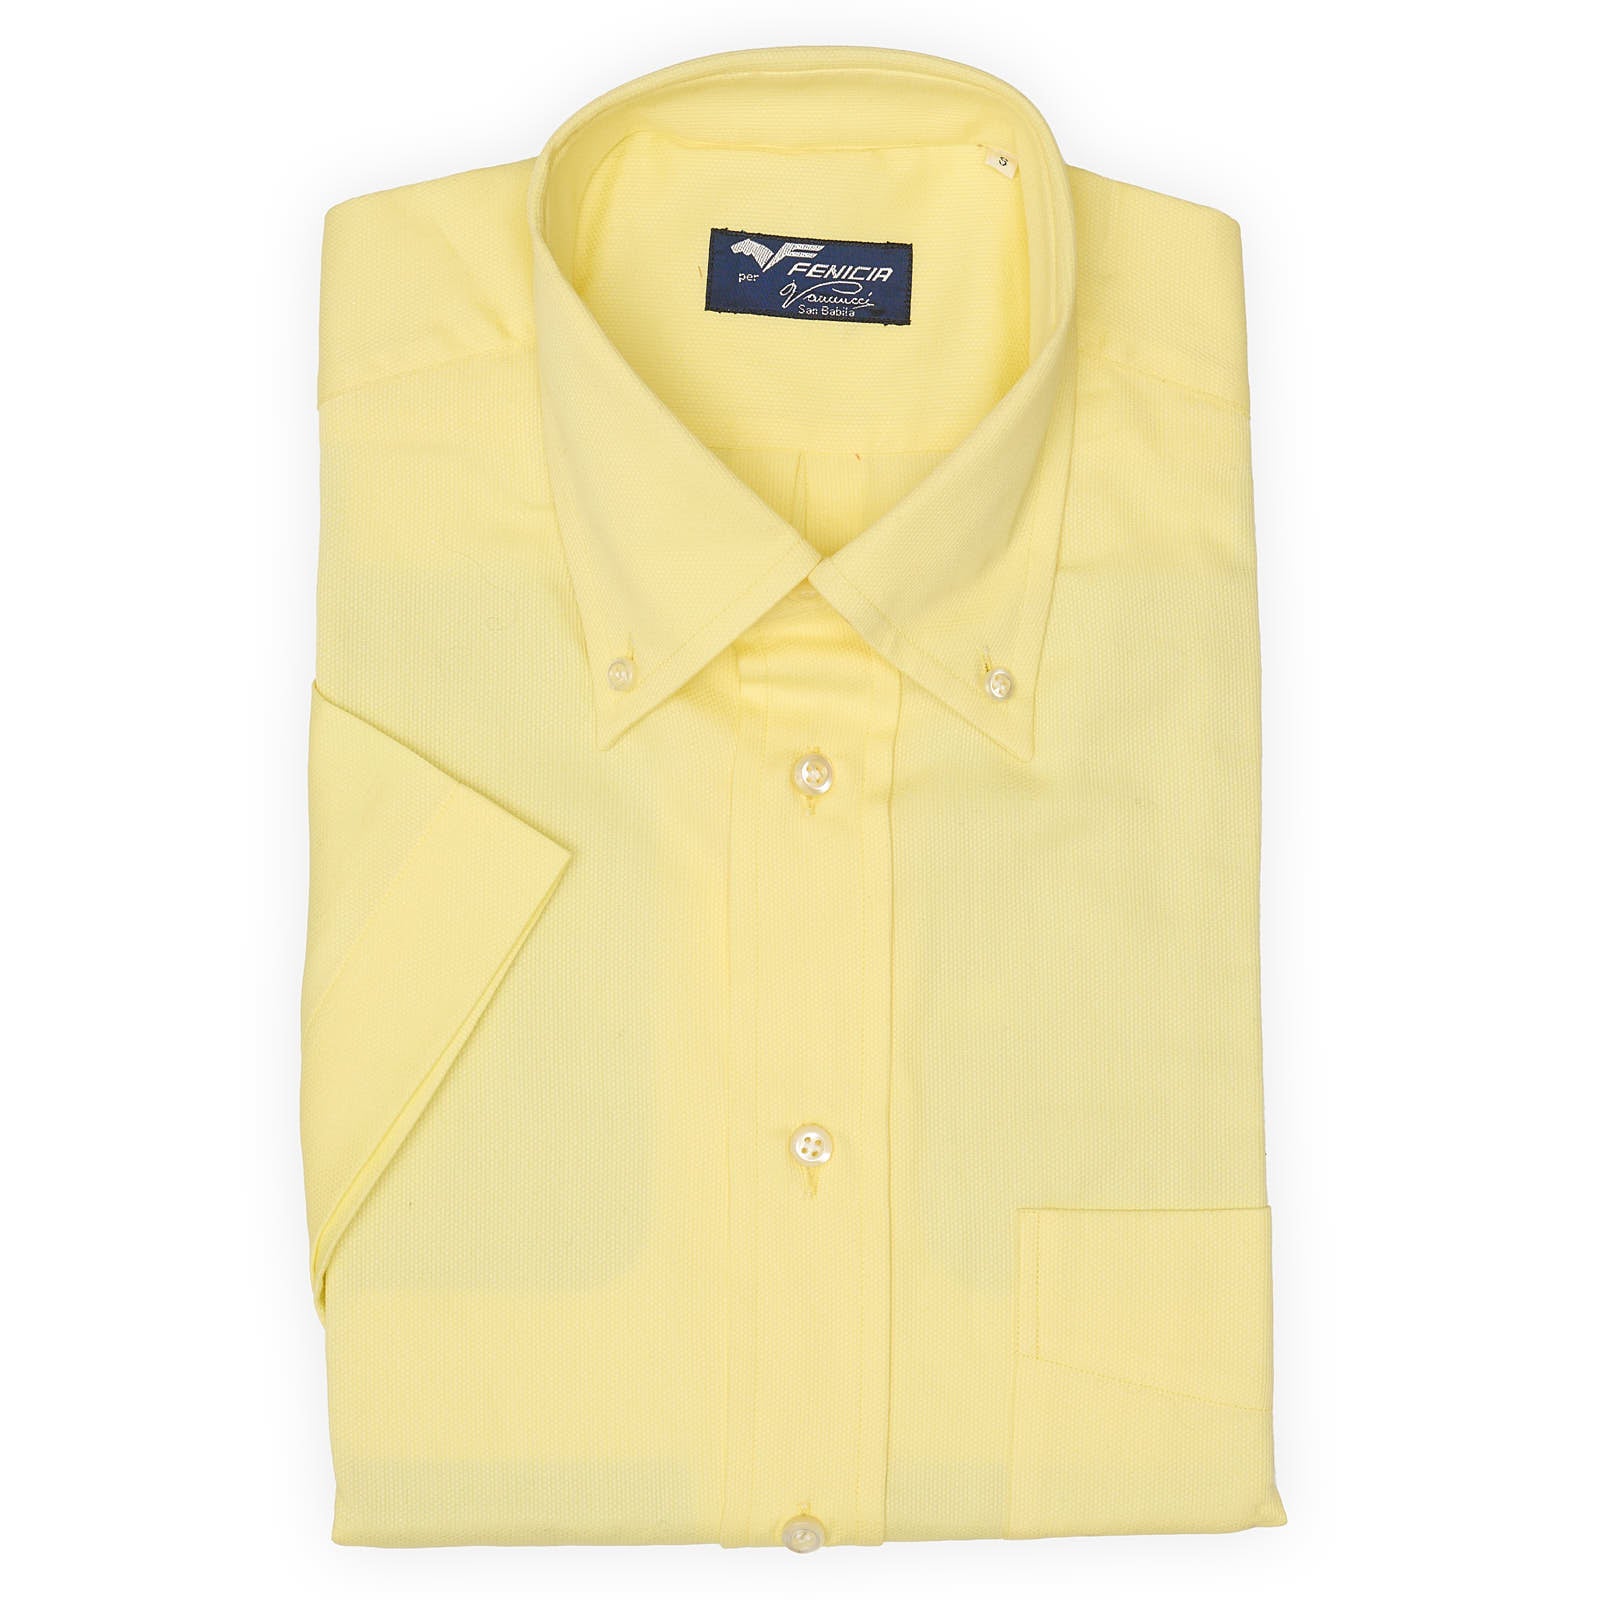 FENICIA for Vannucci Yellow Cotton Short Sleeve Button Down Shirt EU S NEW US 15